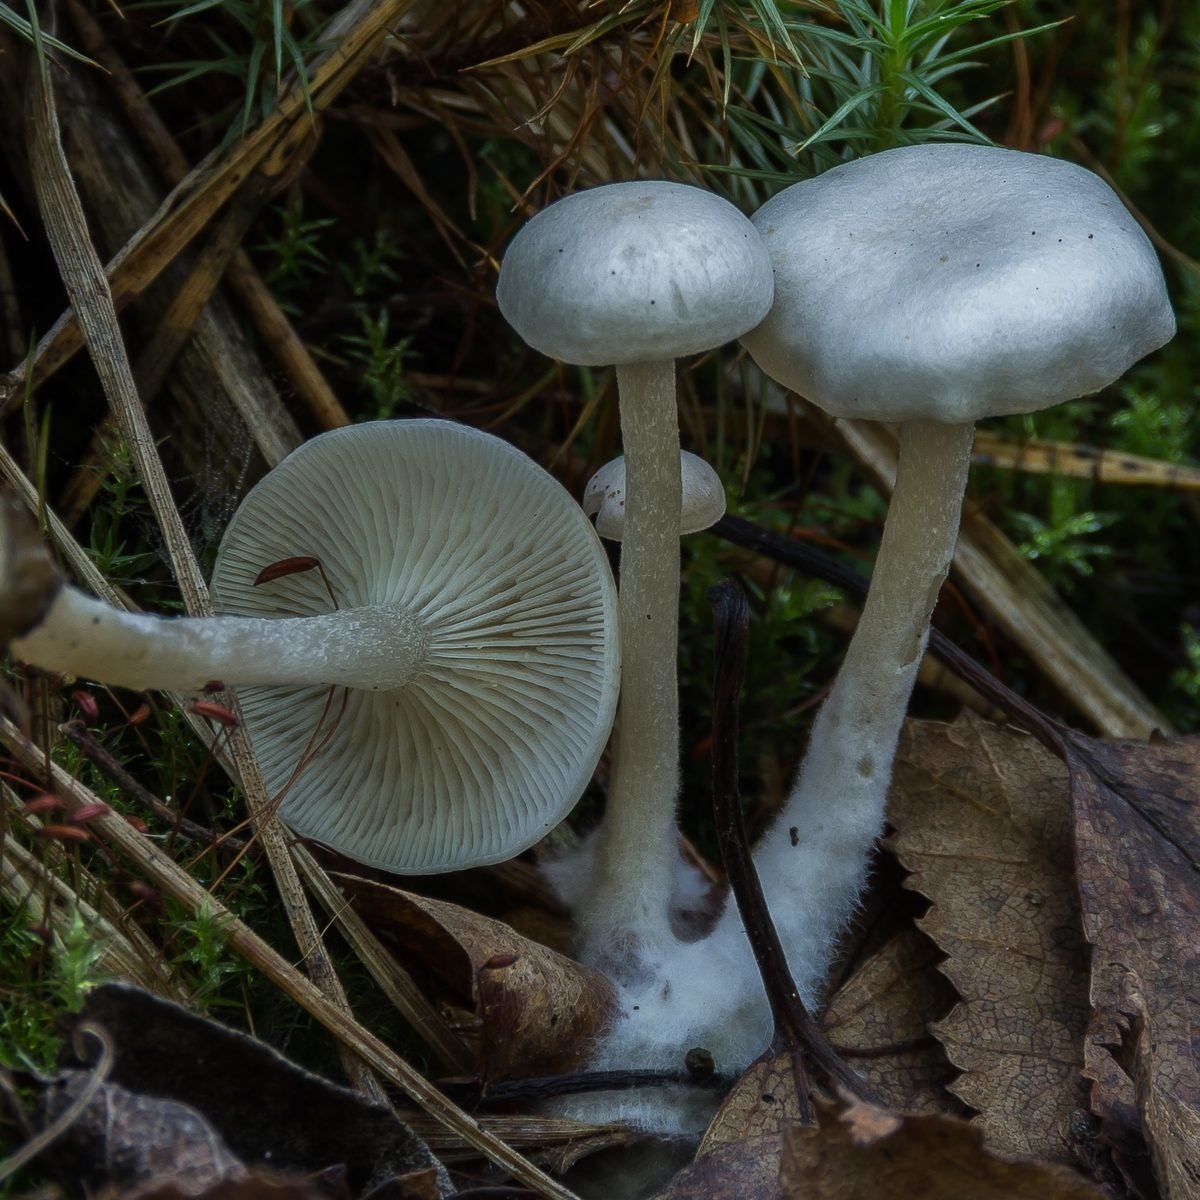 White talker (Leucocybe candicans) photo and description